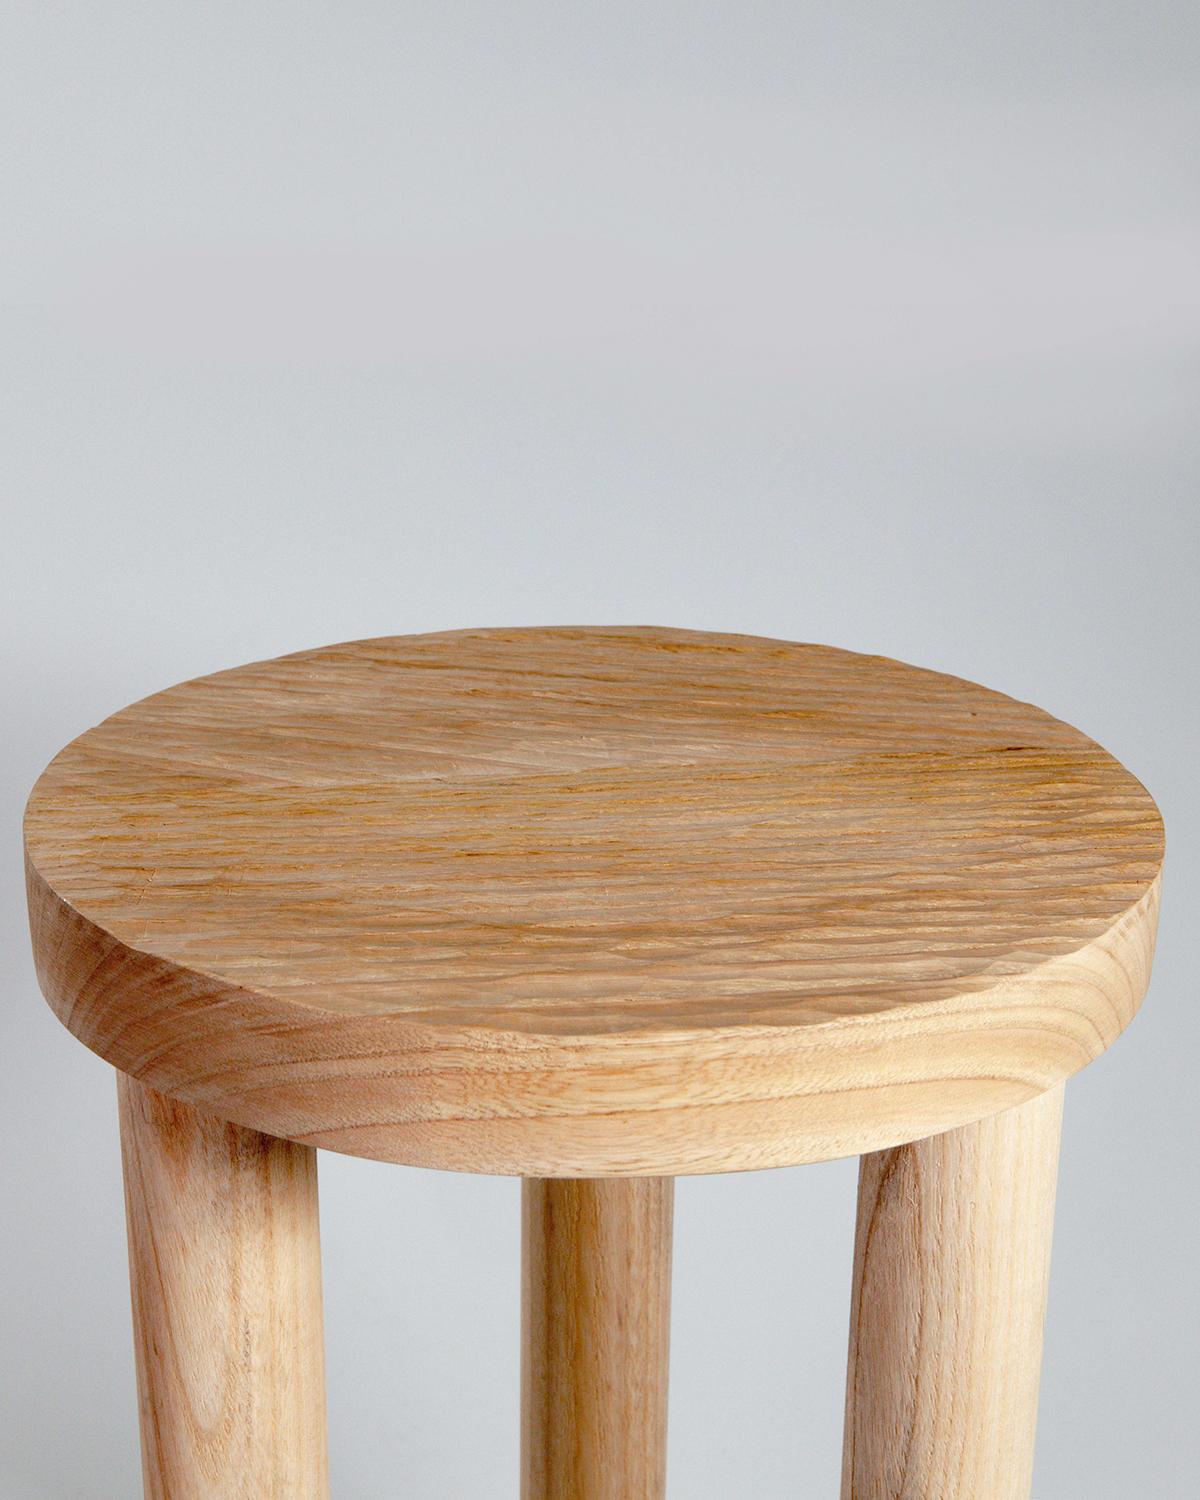 Casa Cubista Hand Carved Solid Wood Stool Portuguese Chestnut Chair Side Table In New Condition For Sale In West Hollywood, CA